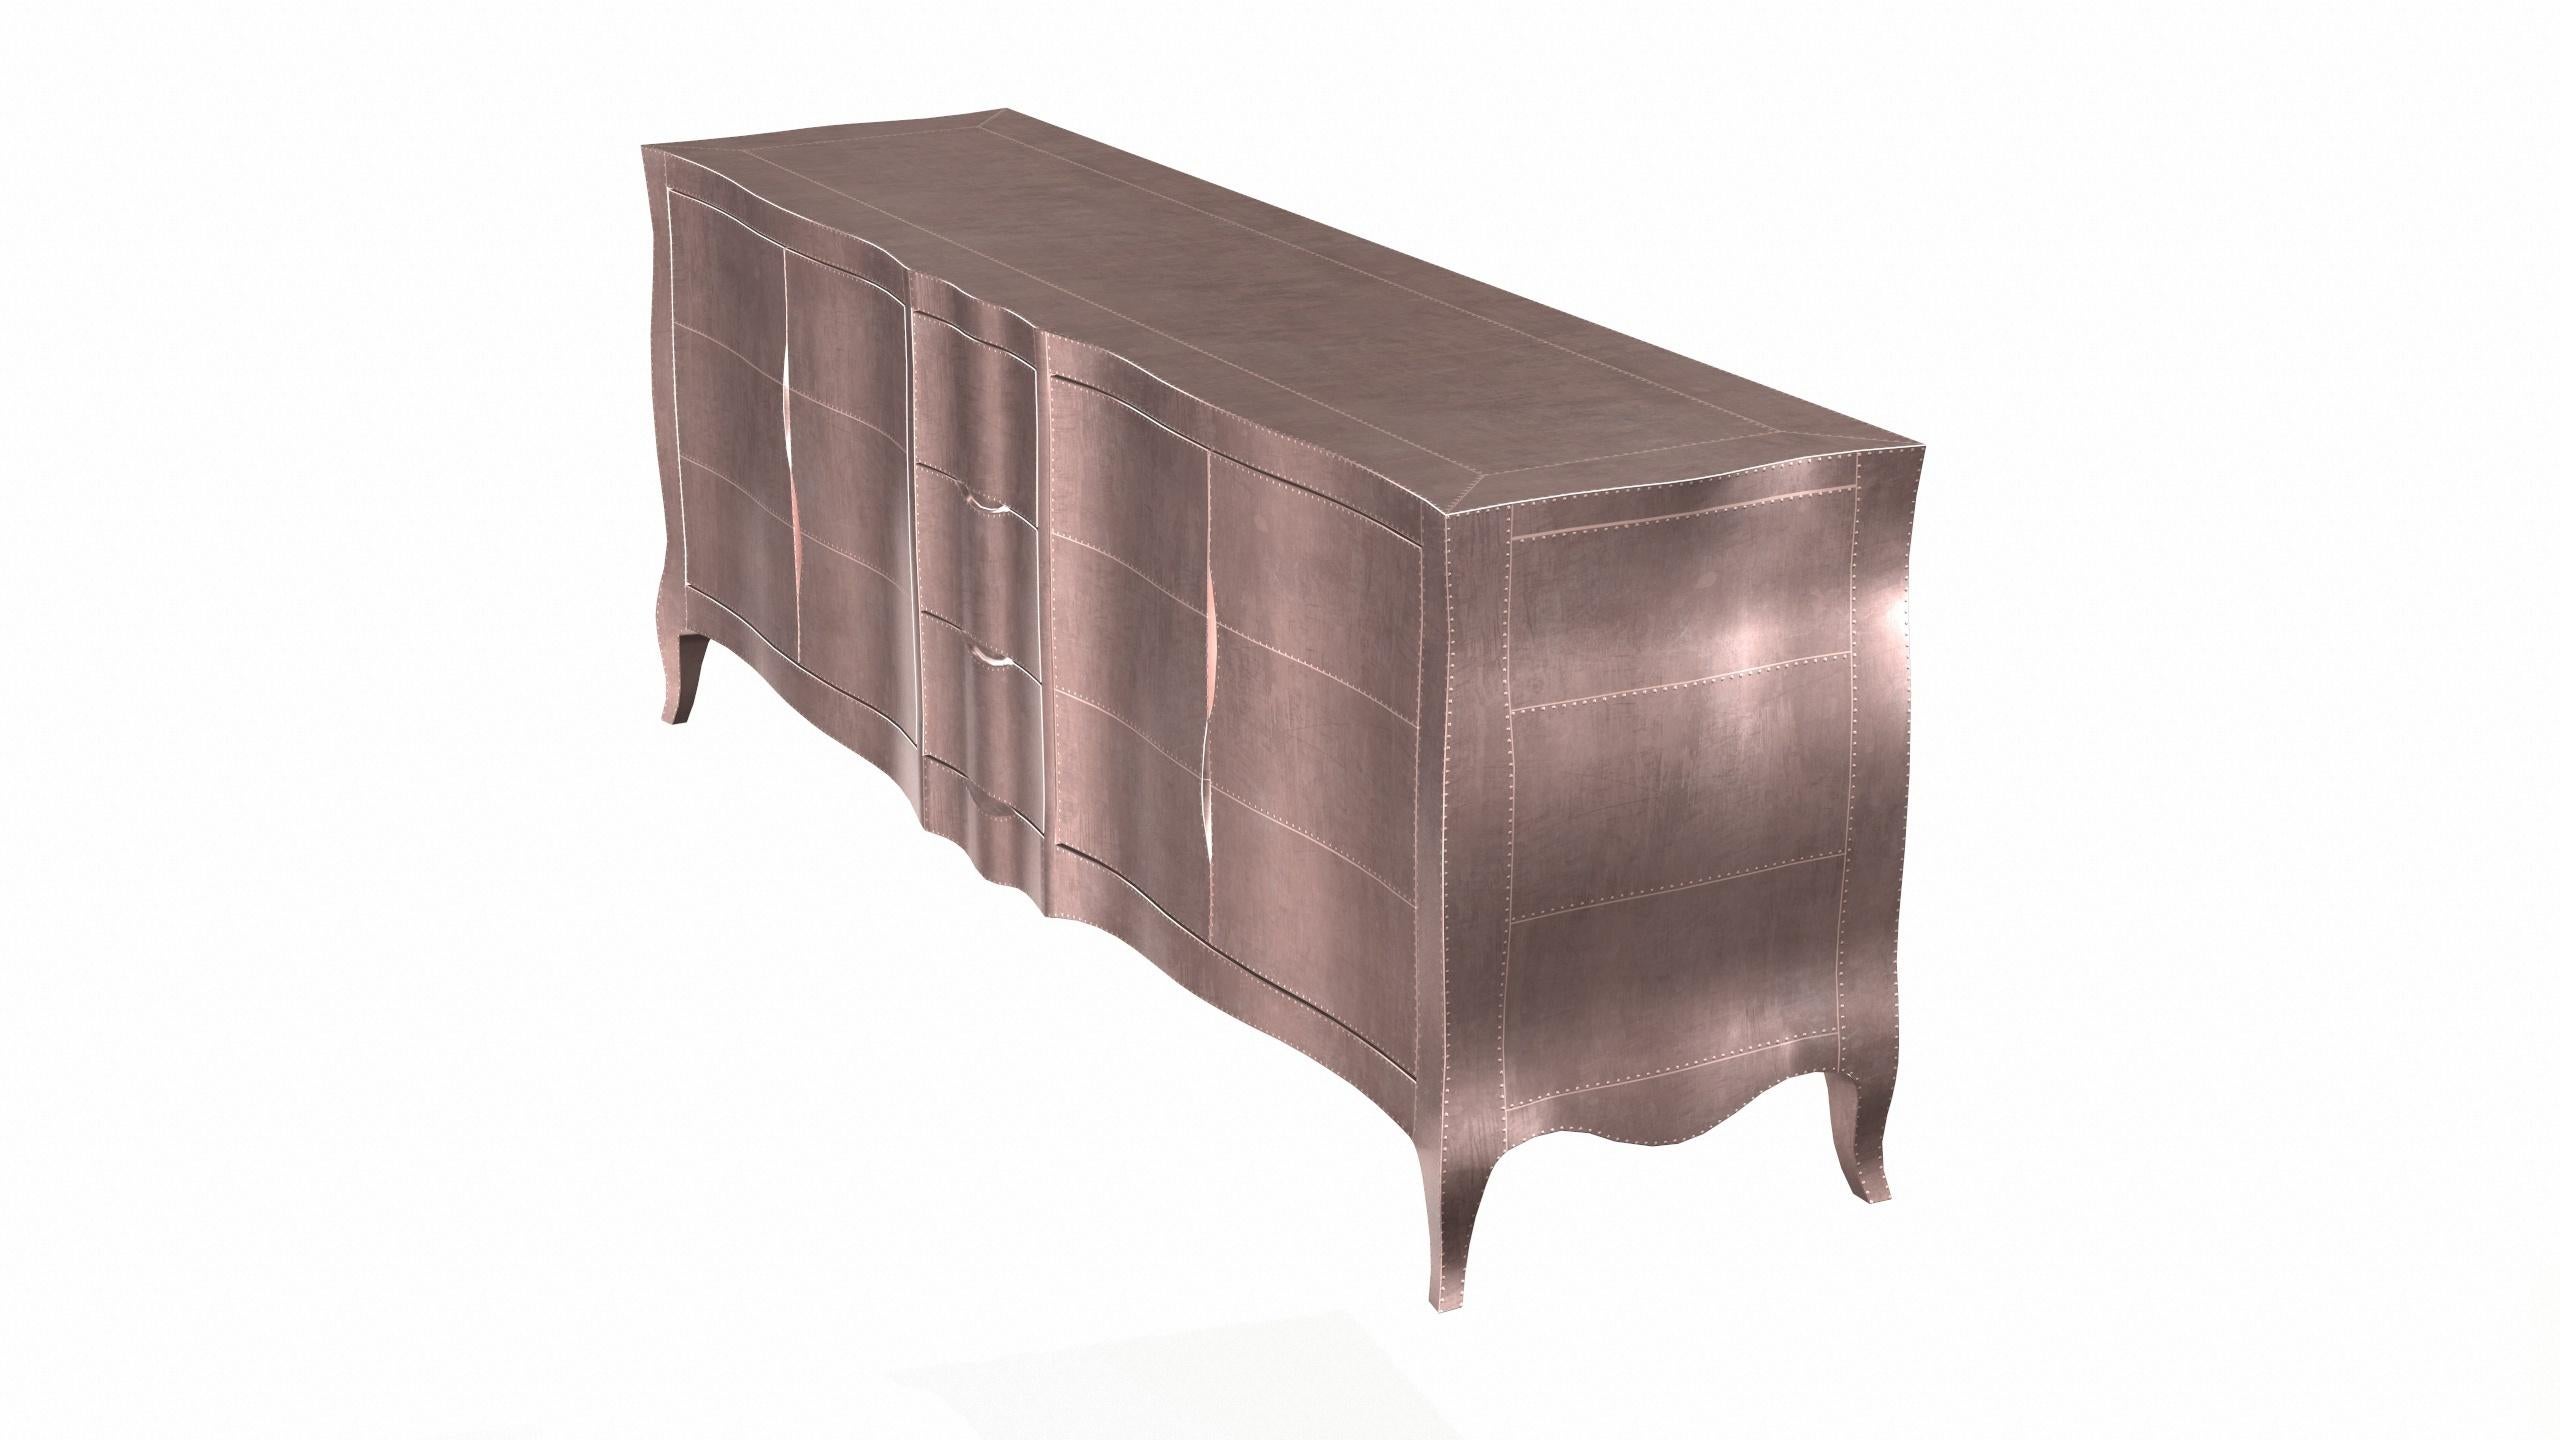 Hand-Carved Louise Credenza Art Deco Bookcases in Smooth Copper by Paul Mathieu  For Sale